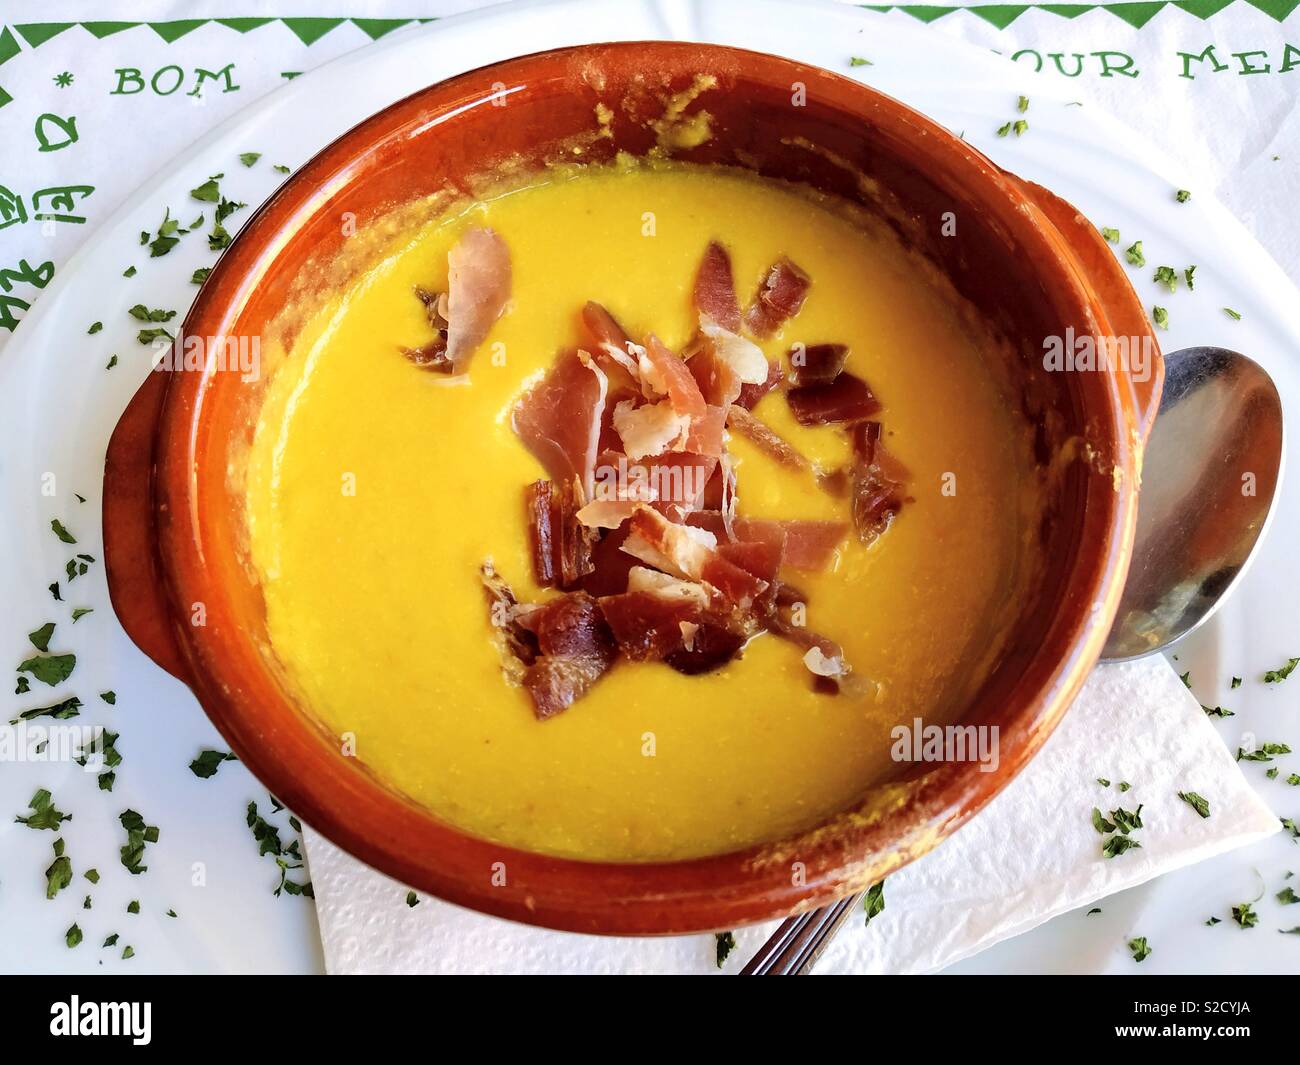 Chickpeas purée with ham. Stock Photo